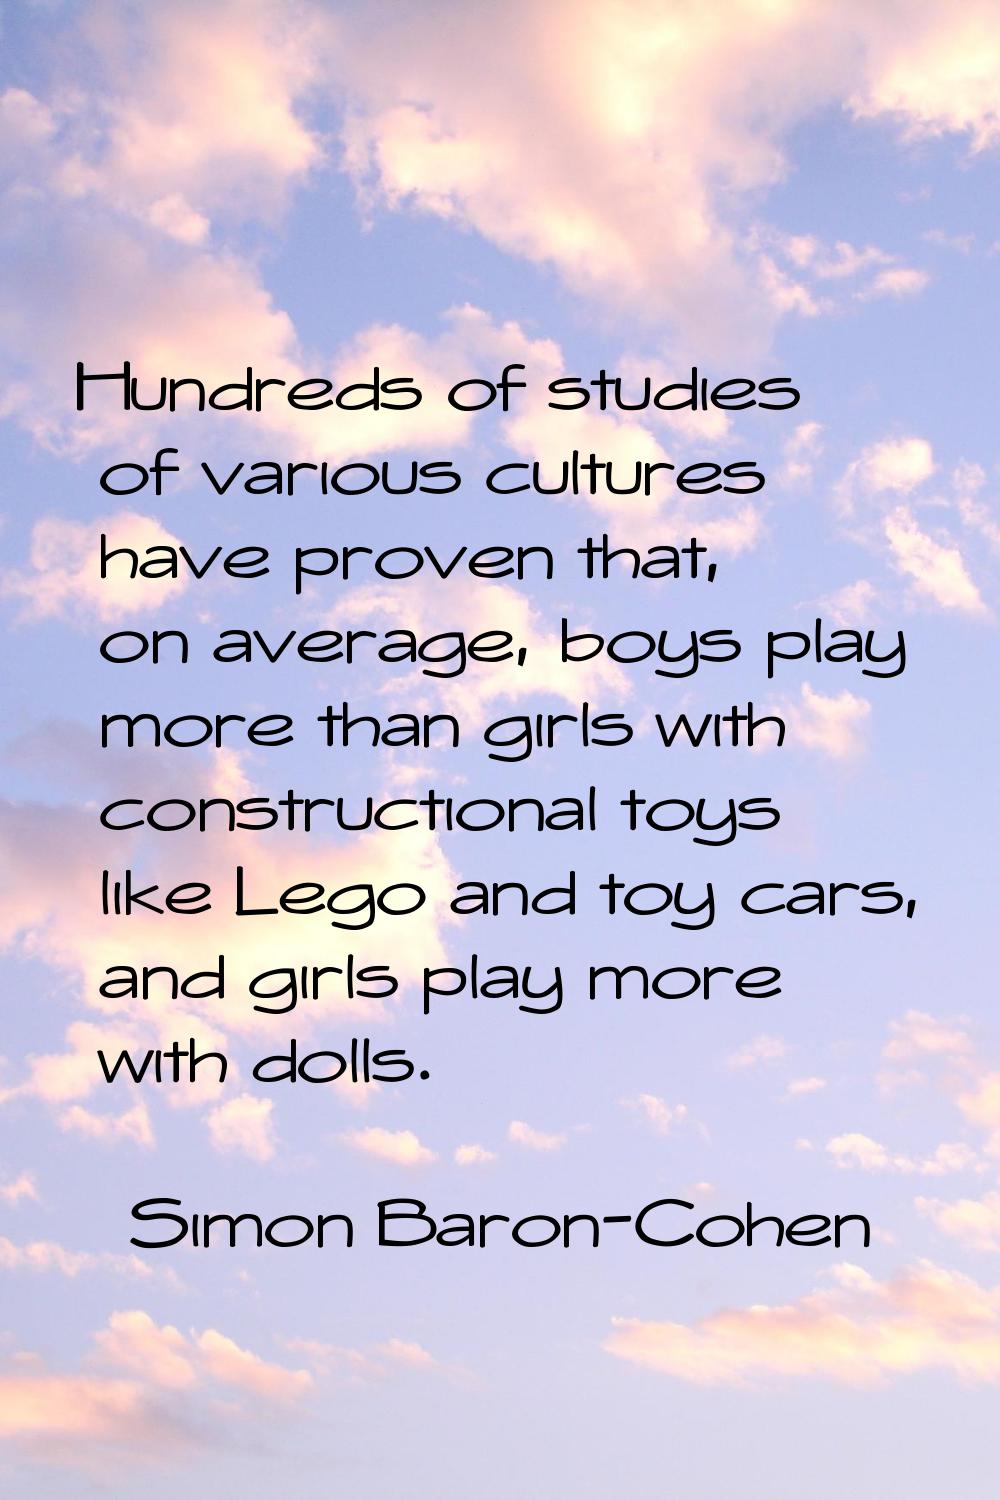 Hundreds of studies of various cultures have proven that, on average, boys play more than girls wit